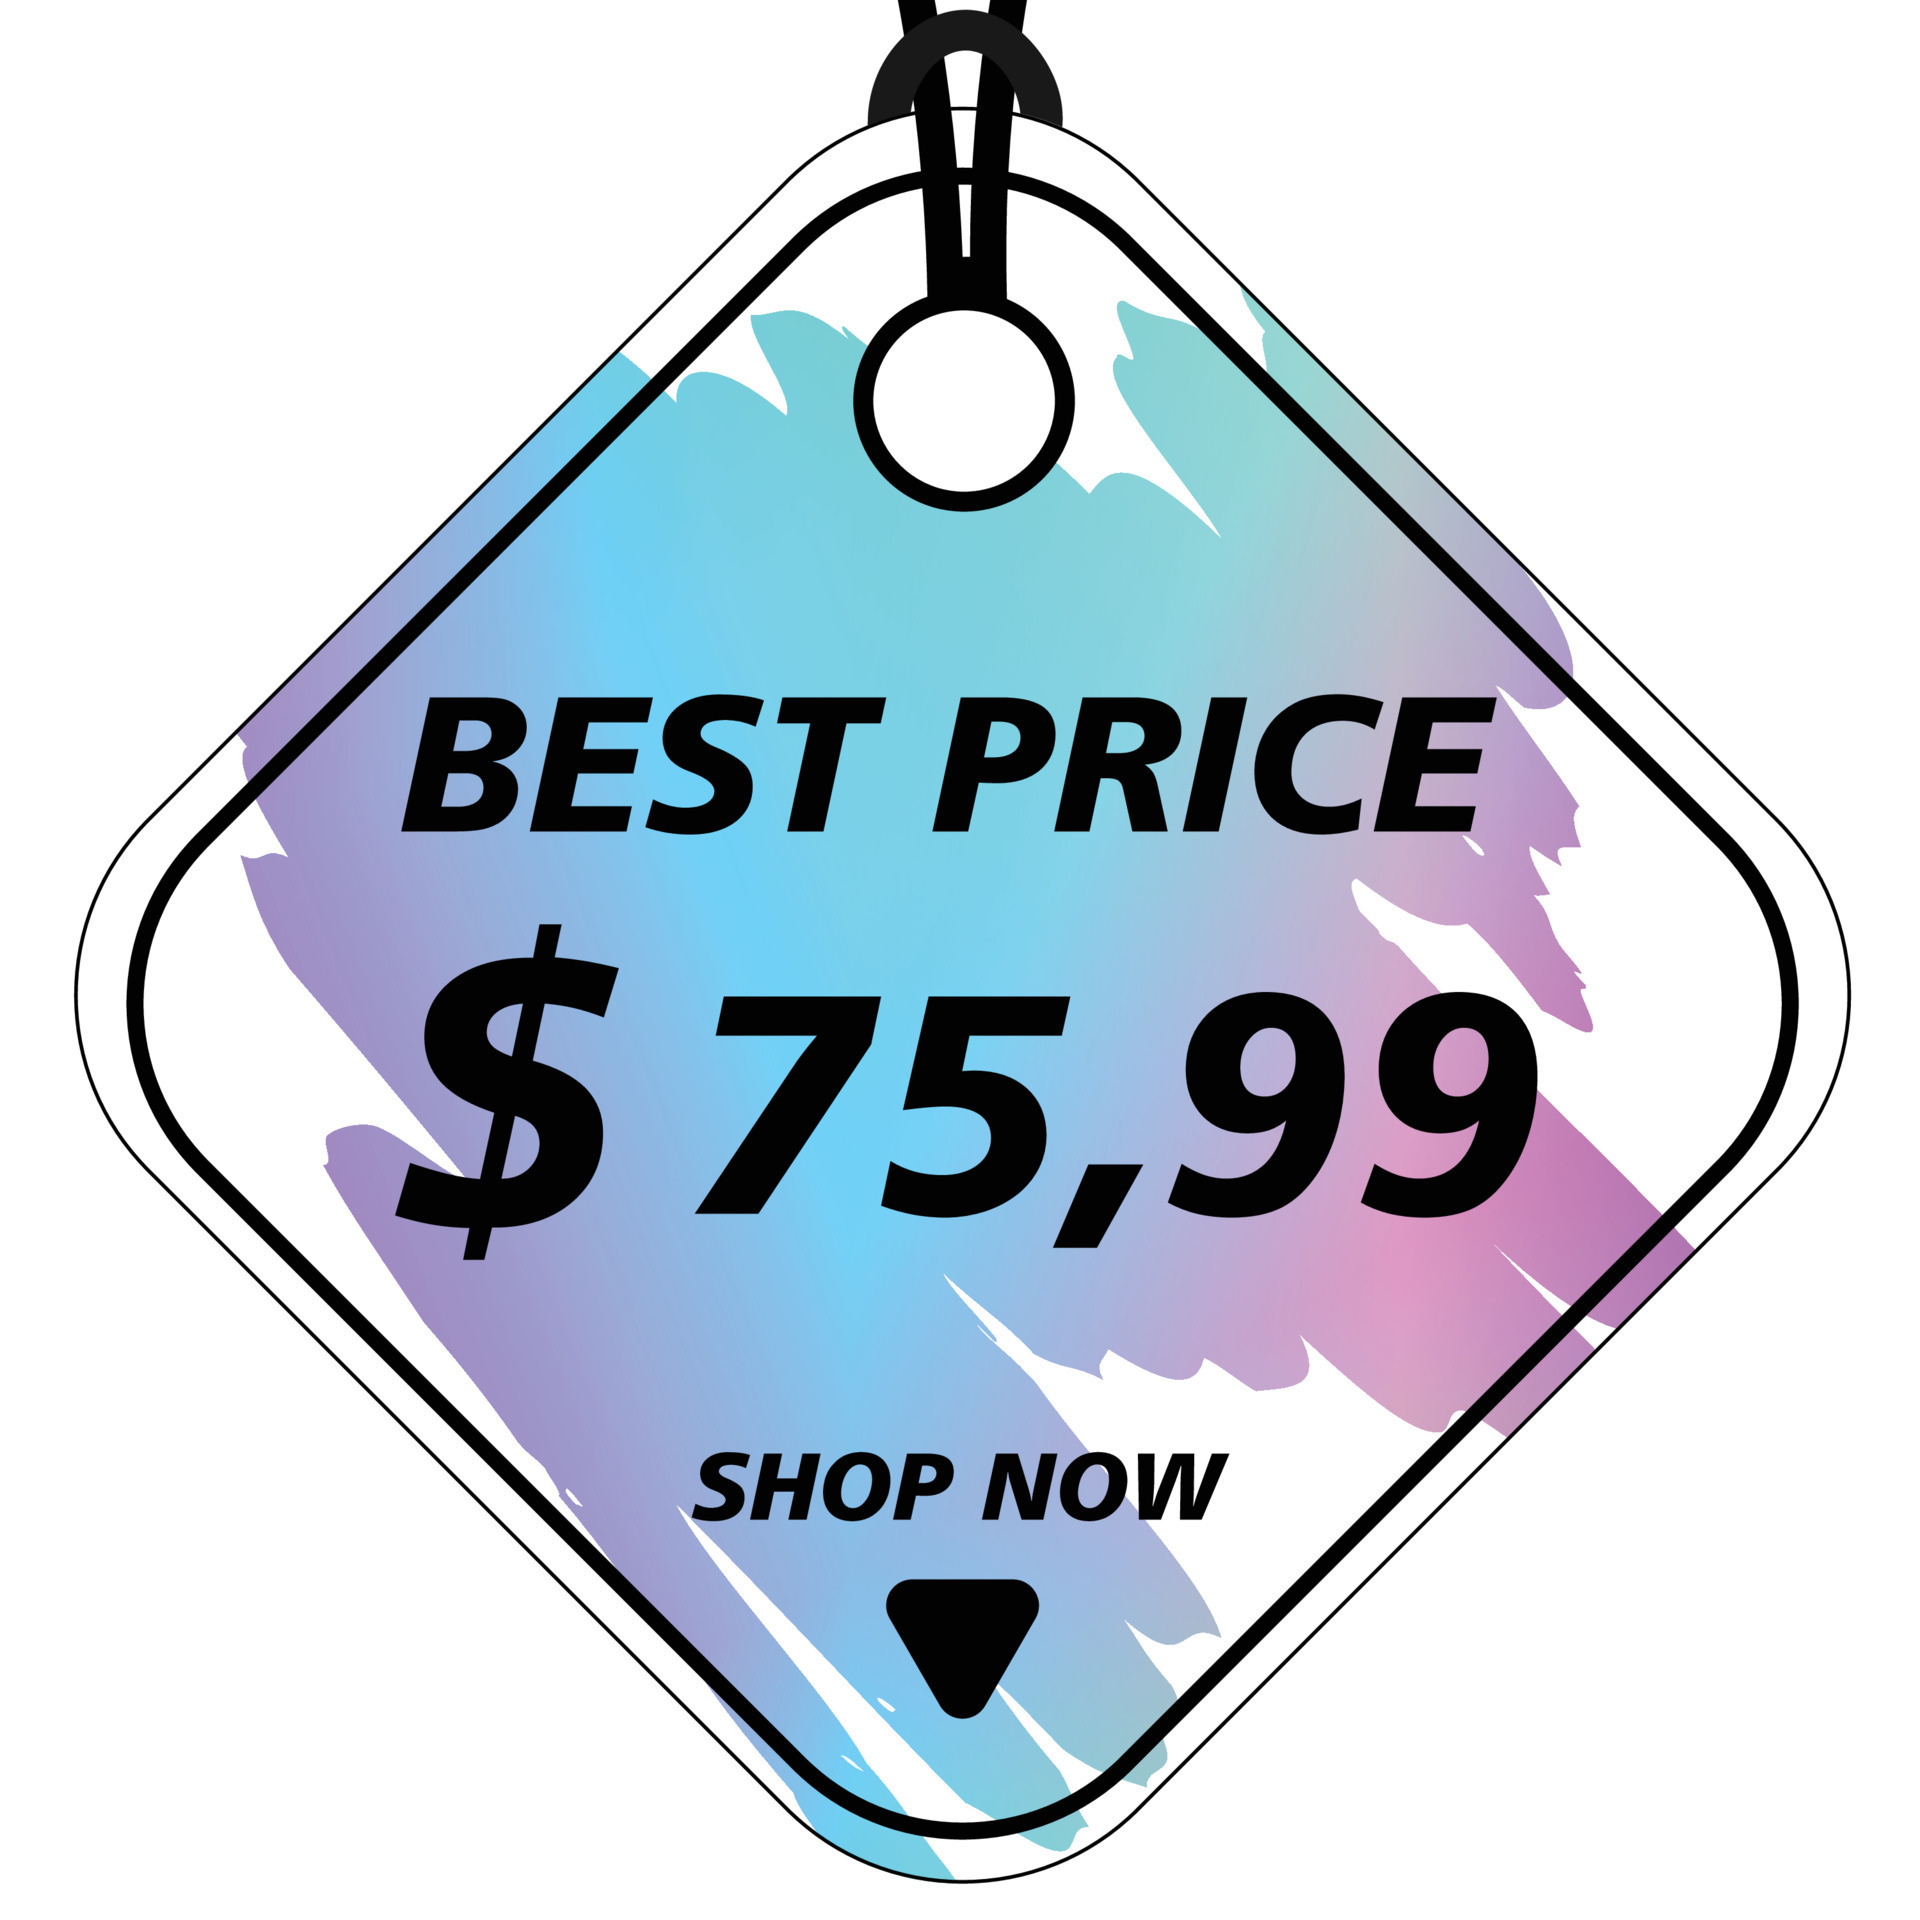 Best Price tags sticker. Price labels with various shapes. Sticker